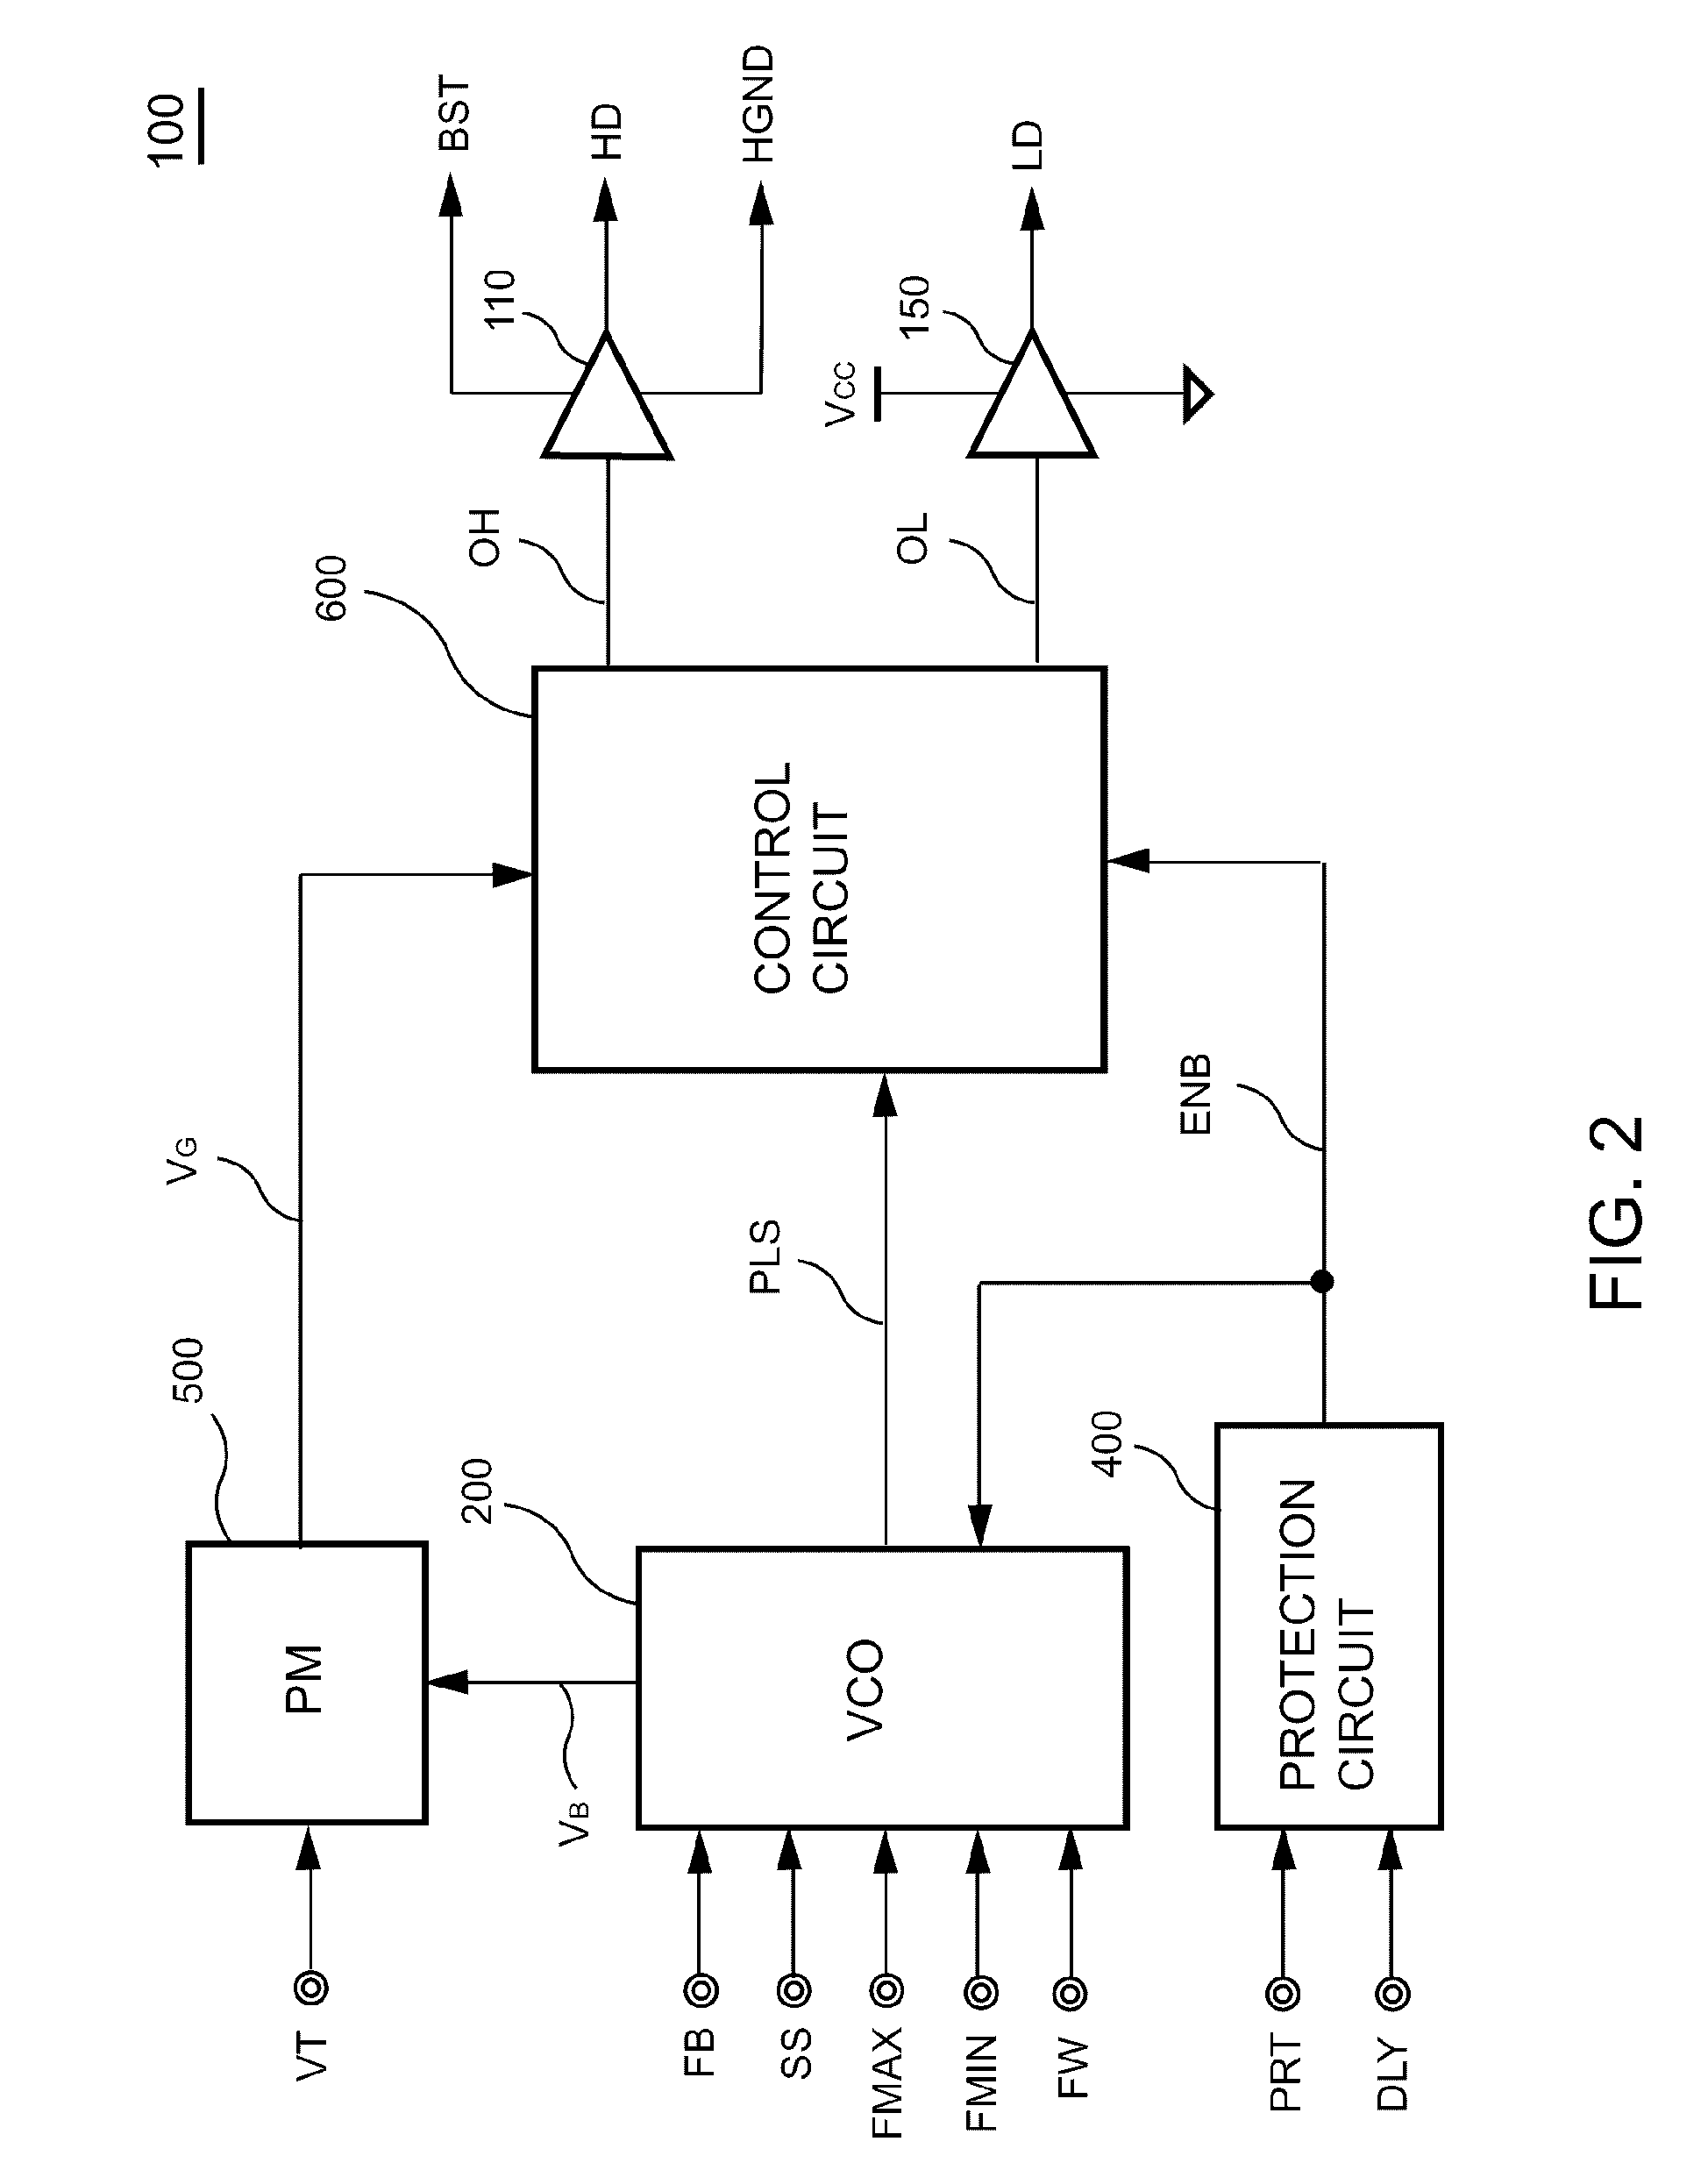 Switching controller for resonant power converter